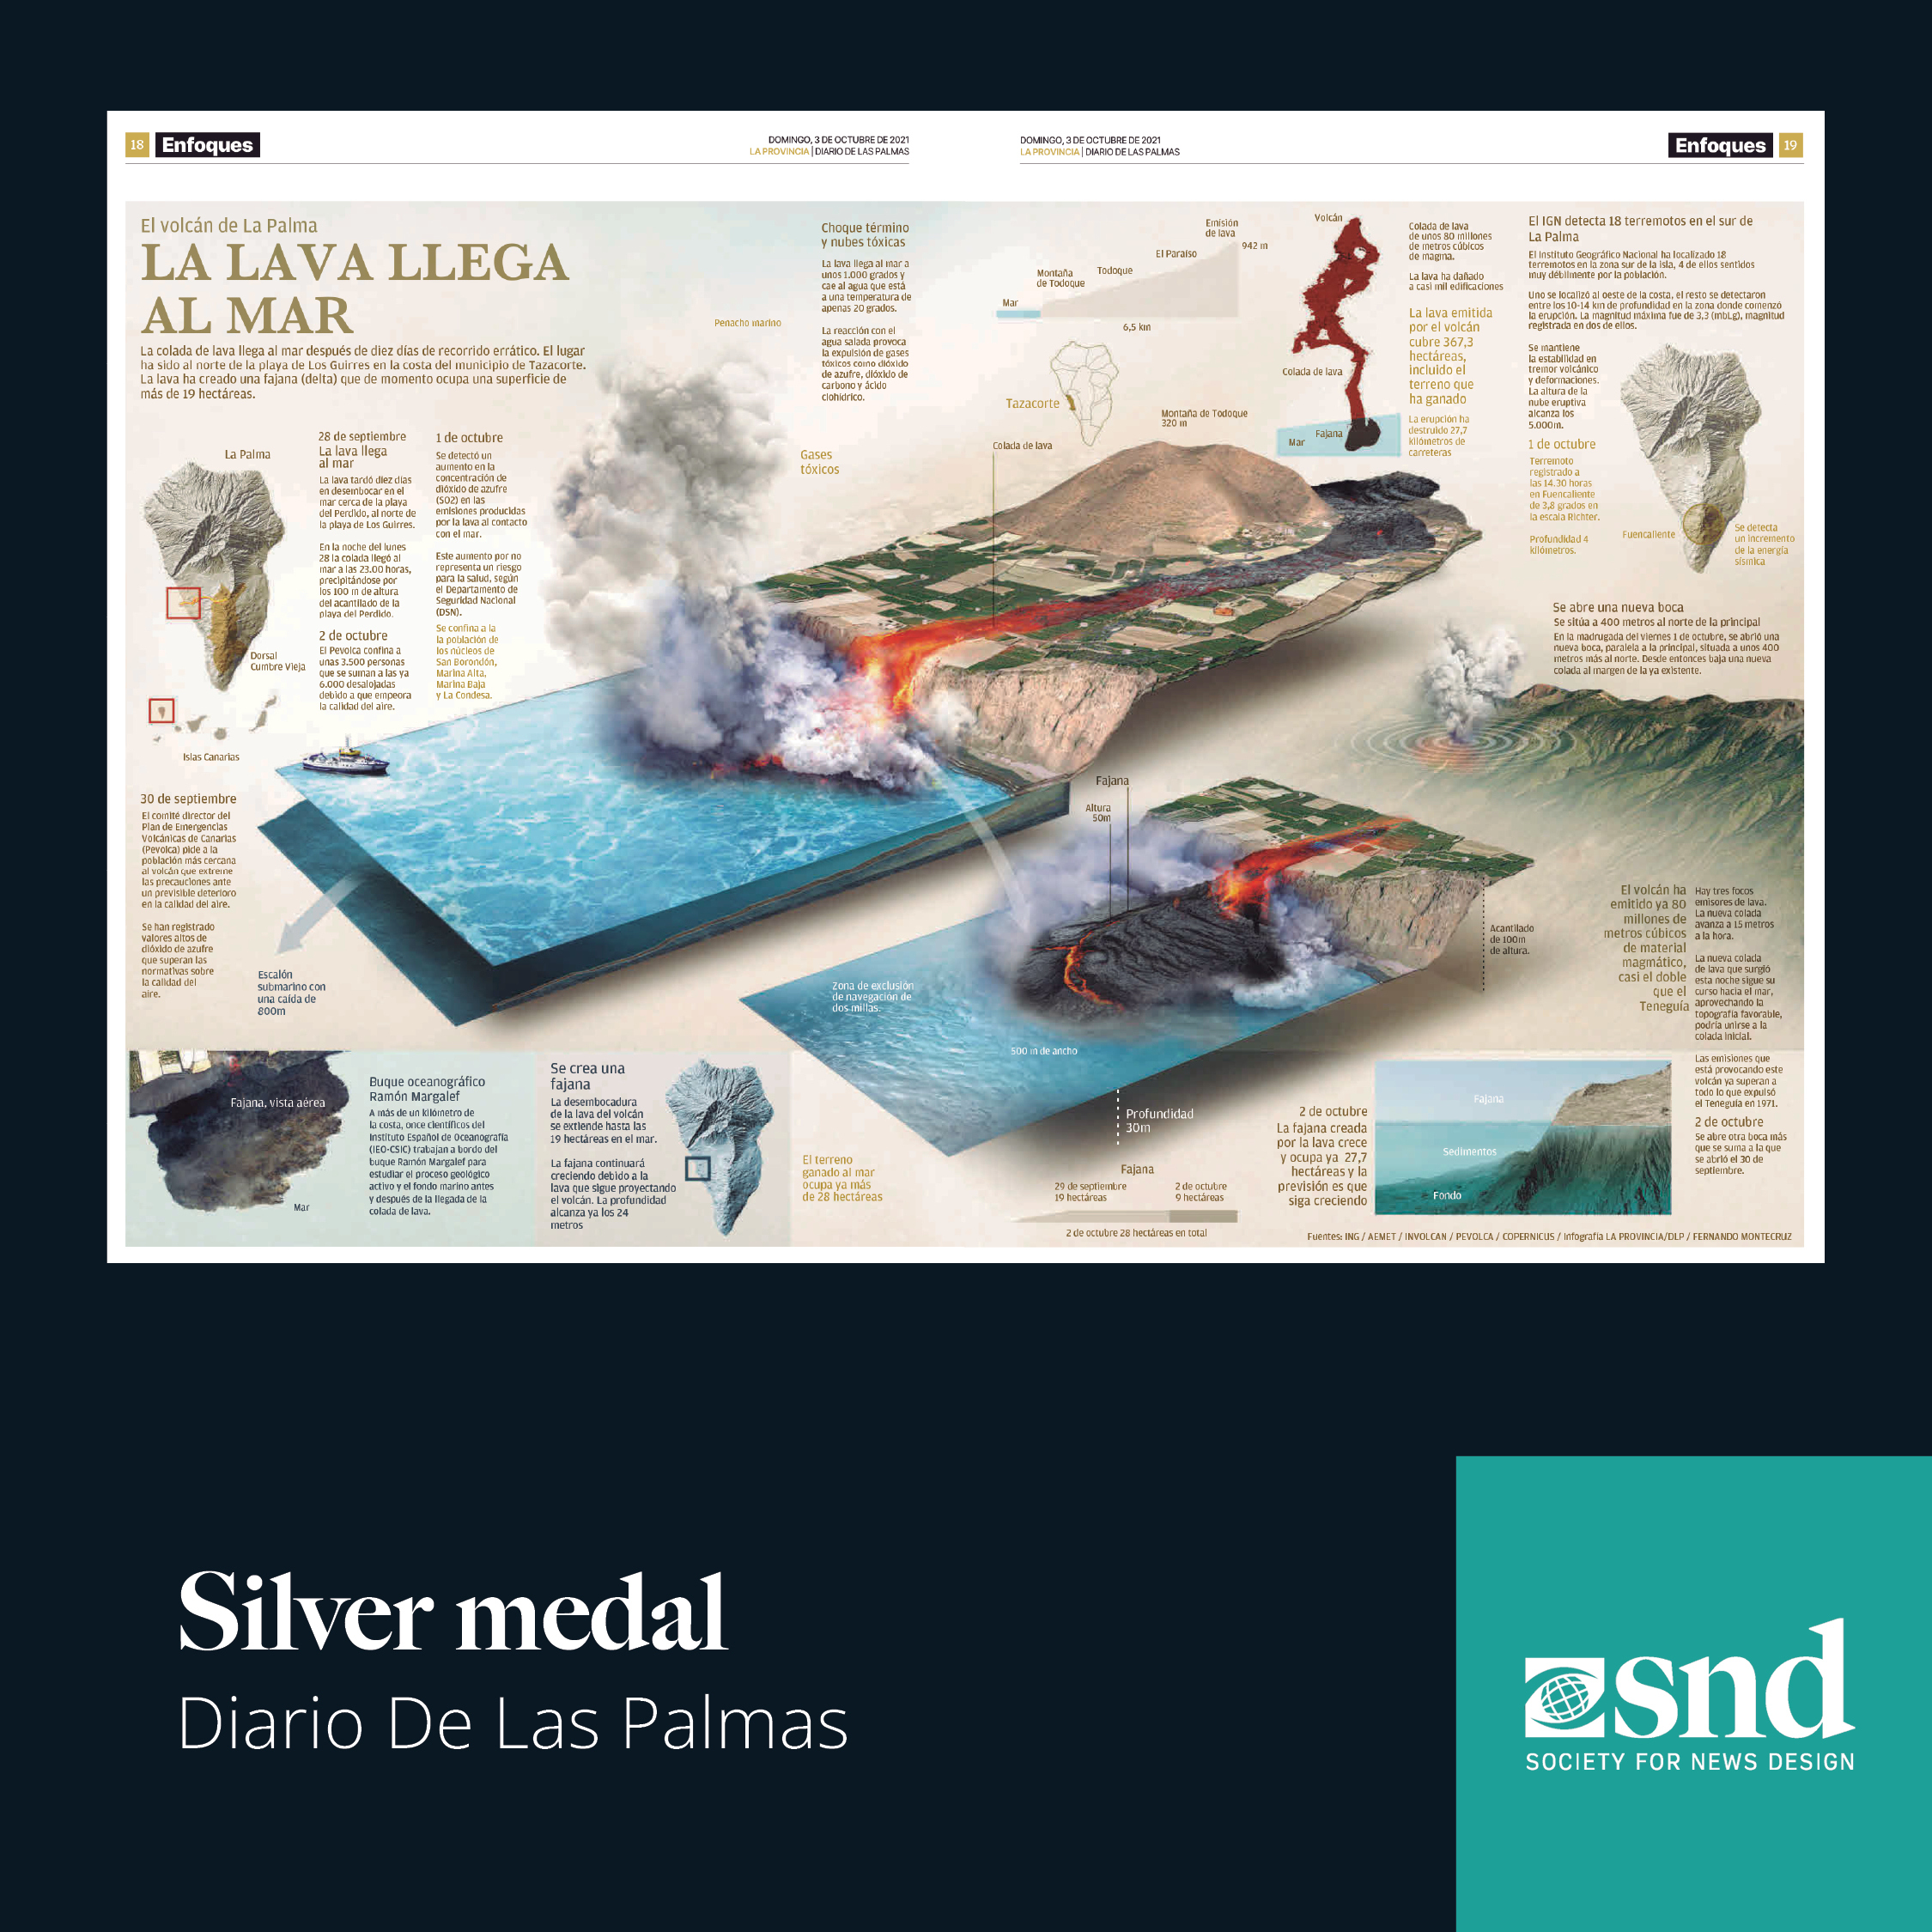 Society for News Design on X: "🥈A silver medal has been awarded to Diario  de las Palmas @laprovincia_es in Single Graphic (News). The judges said:  "It's just so gorgeous. The color combination